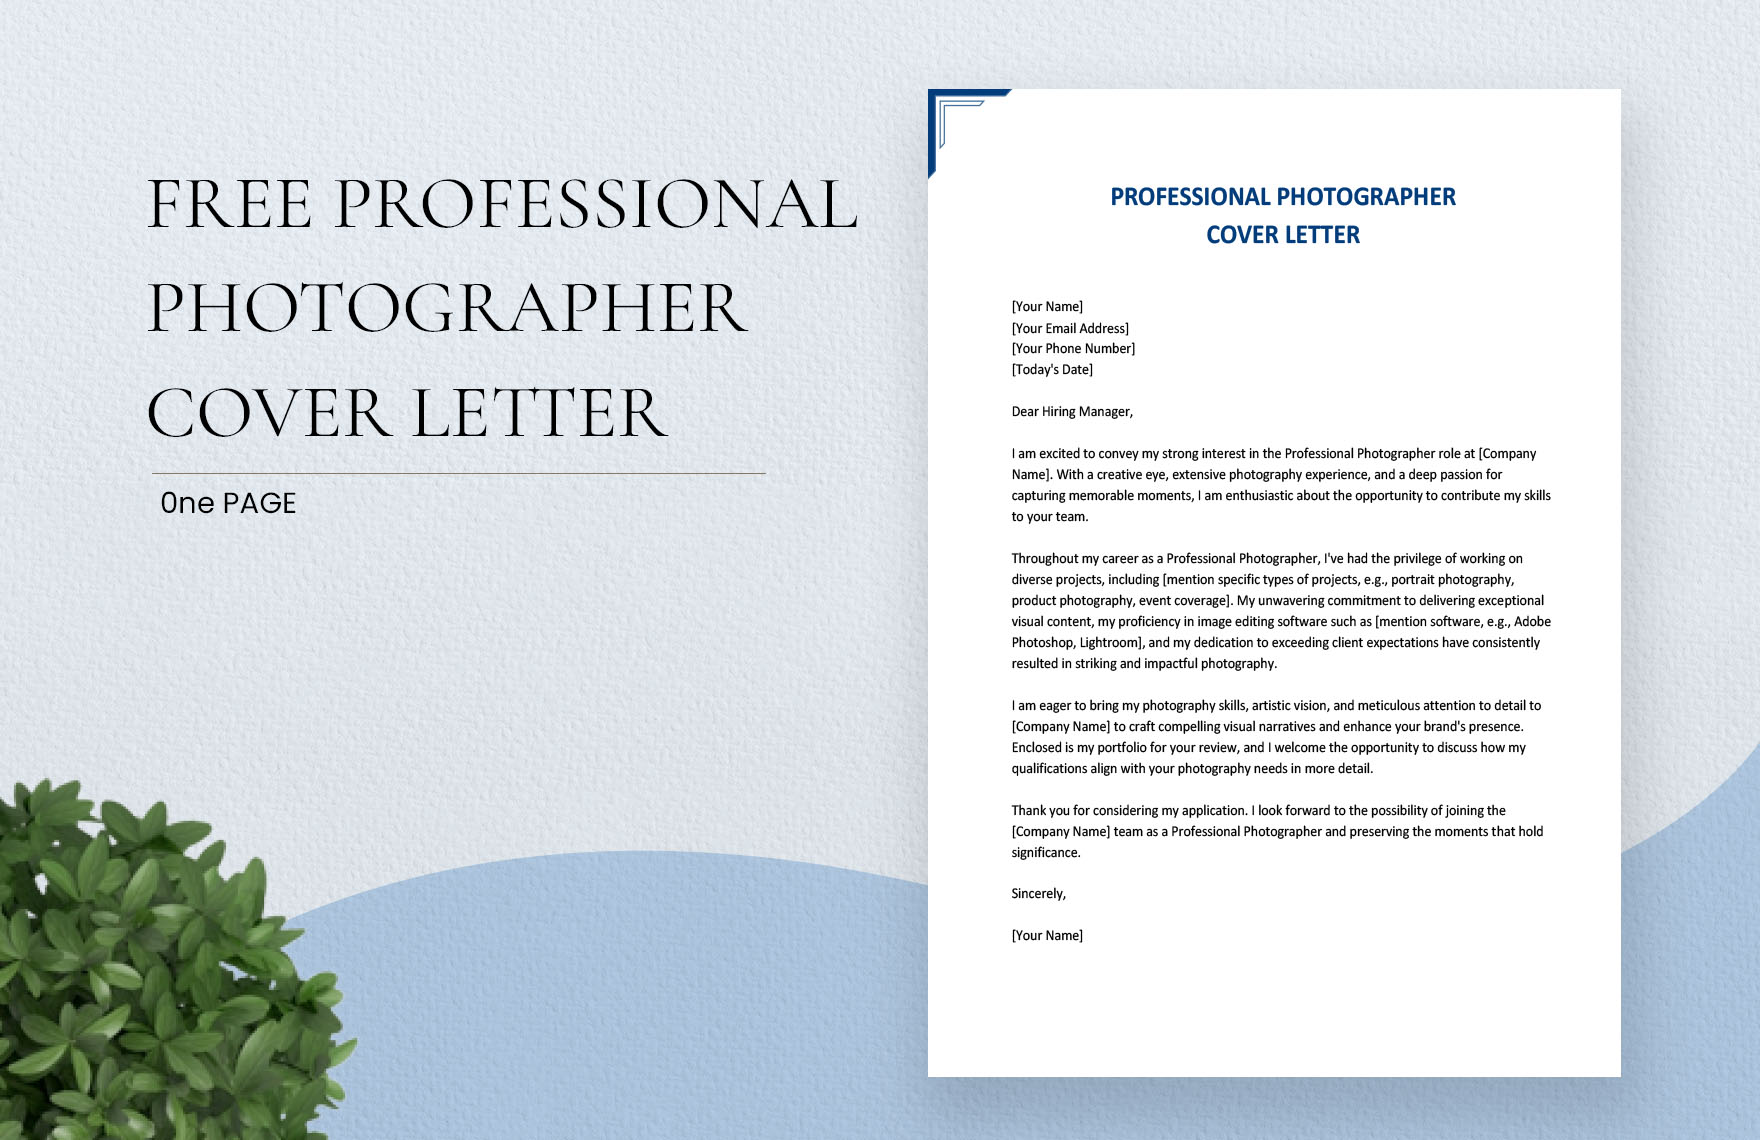 Professional Photographer Cover Letter in Word, Google Docs